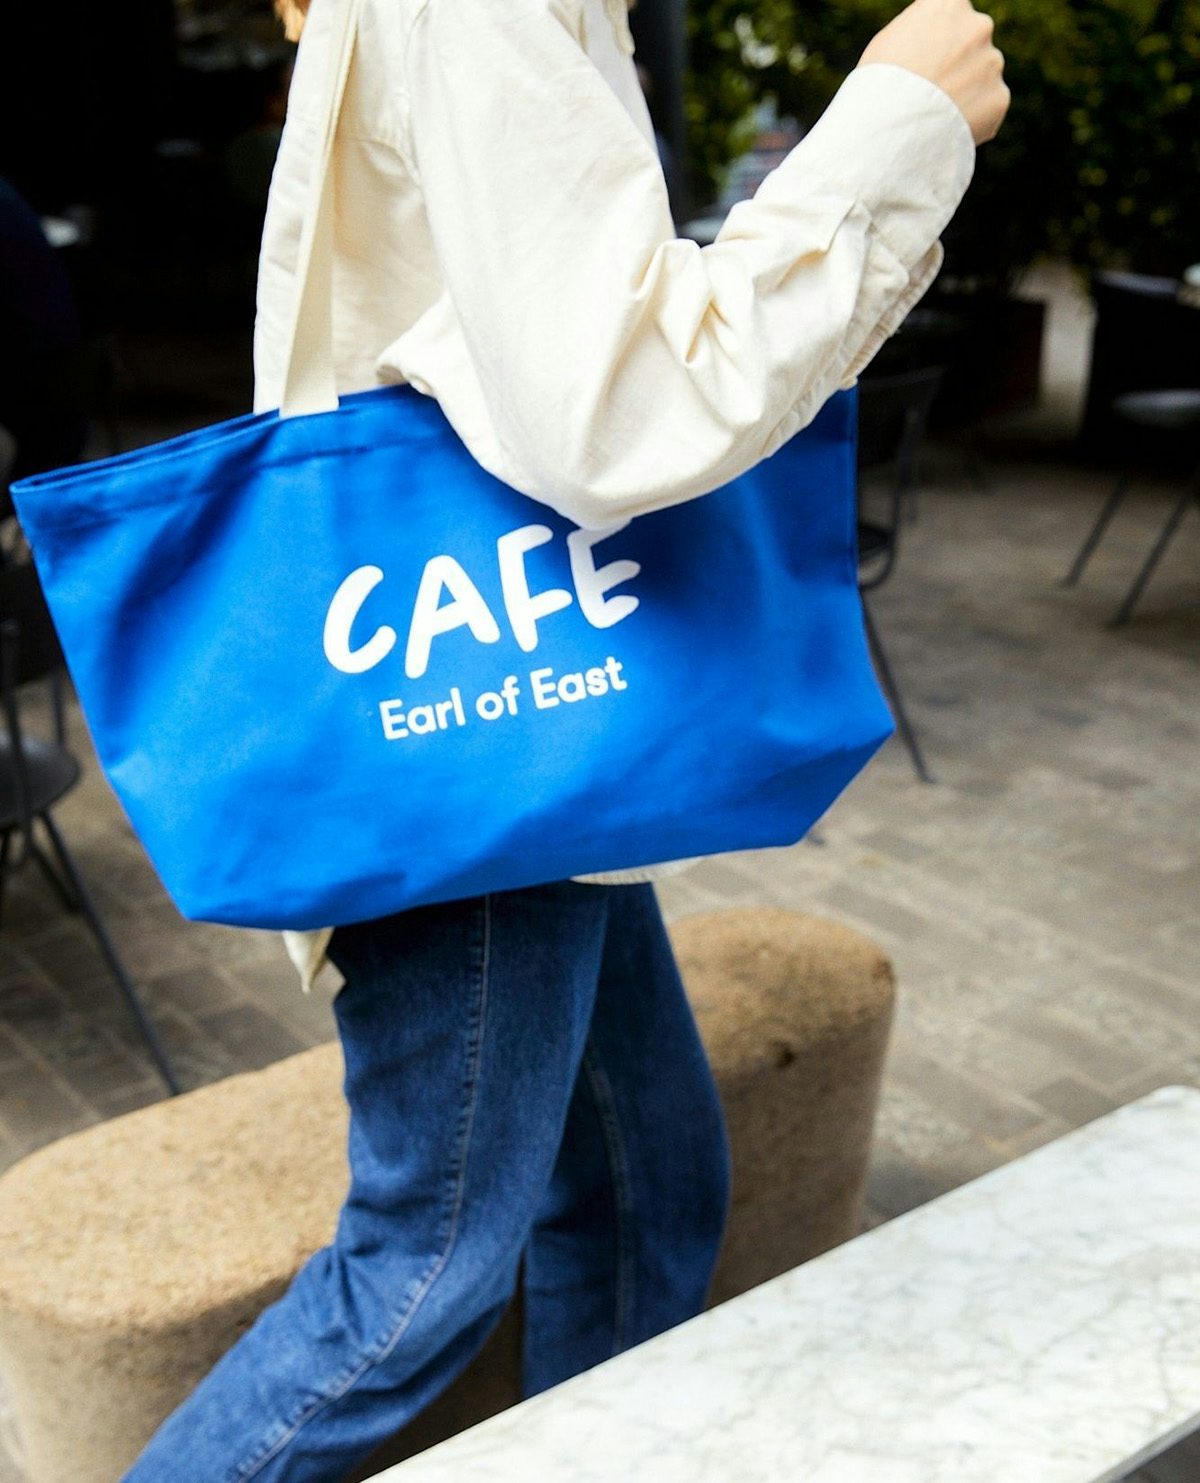 A person wearing jeans, a light shirt and a bright blue tote bag labelled 'cafe'